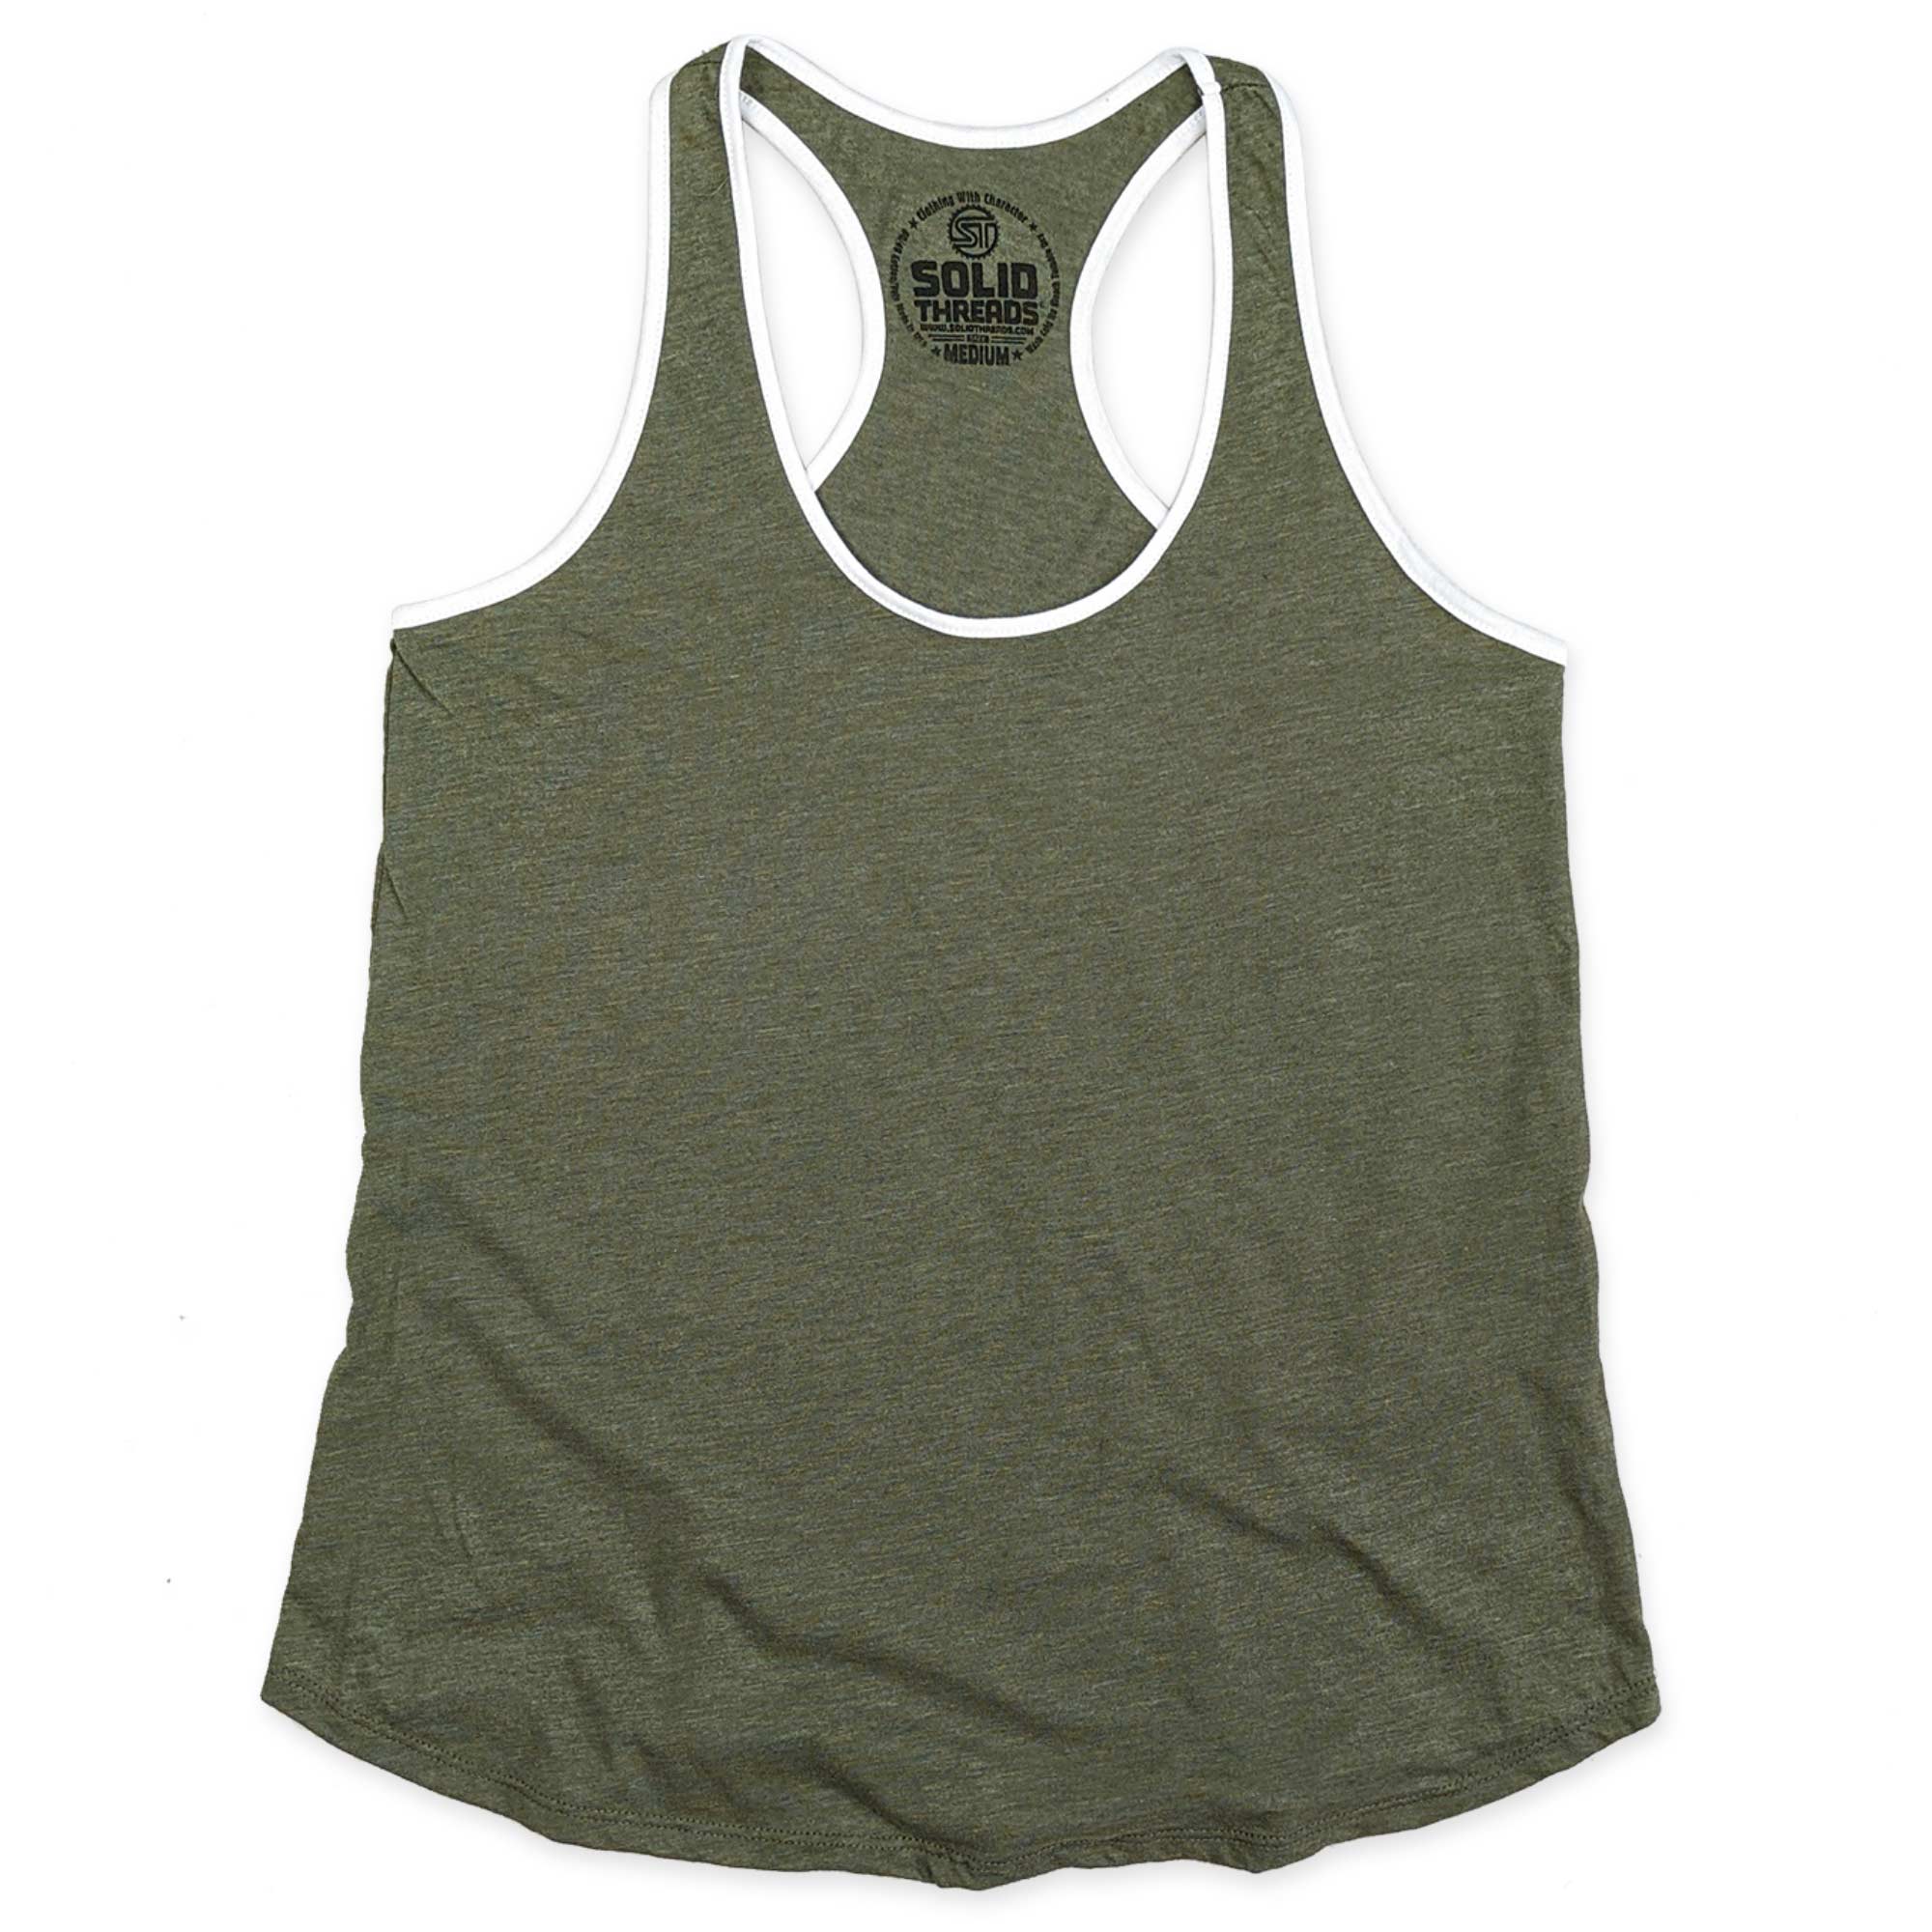 Women's Solid Threads Retro Ringer Olive/White Tank Top | Vintage Inspired USA Made Tee